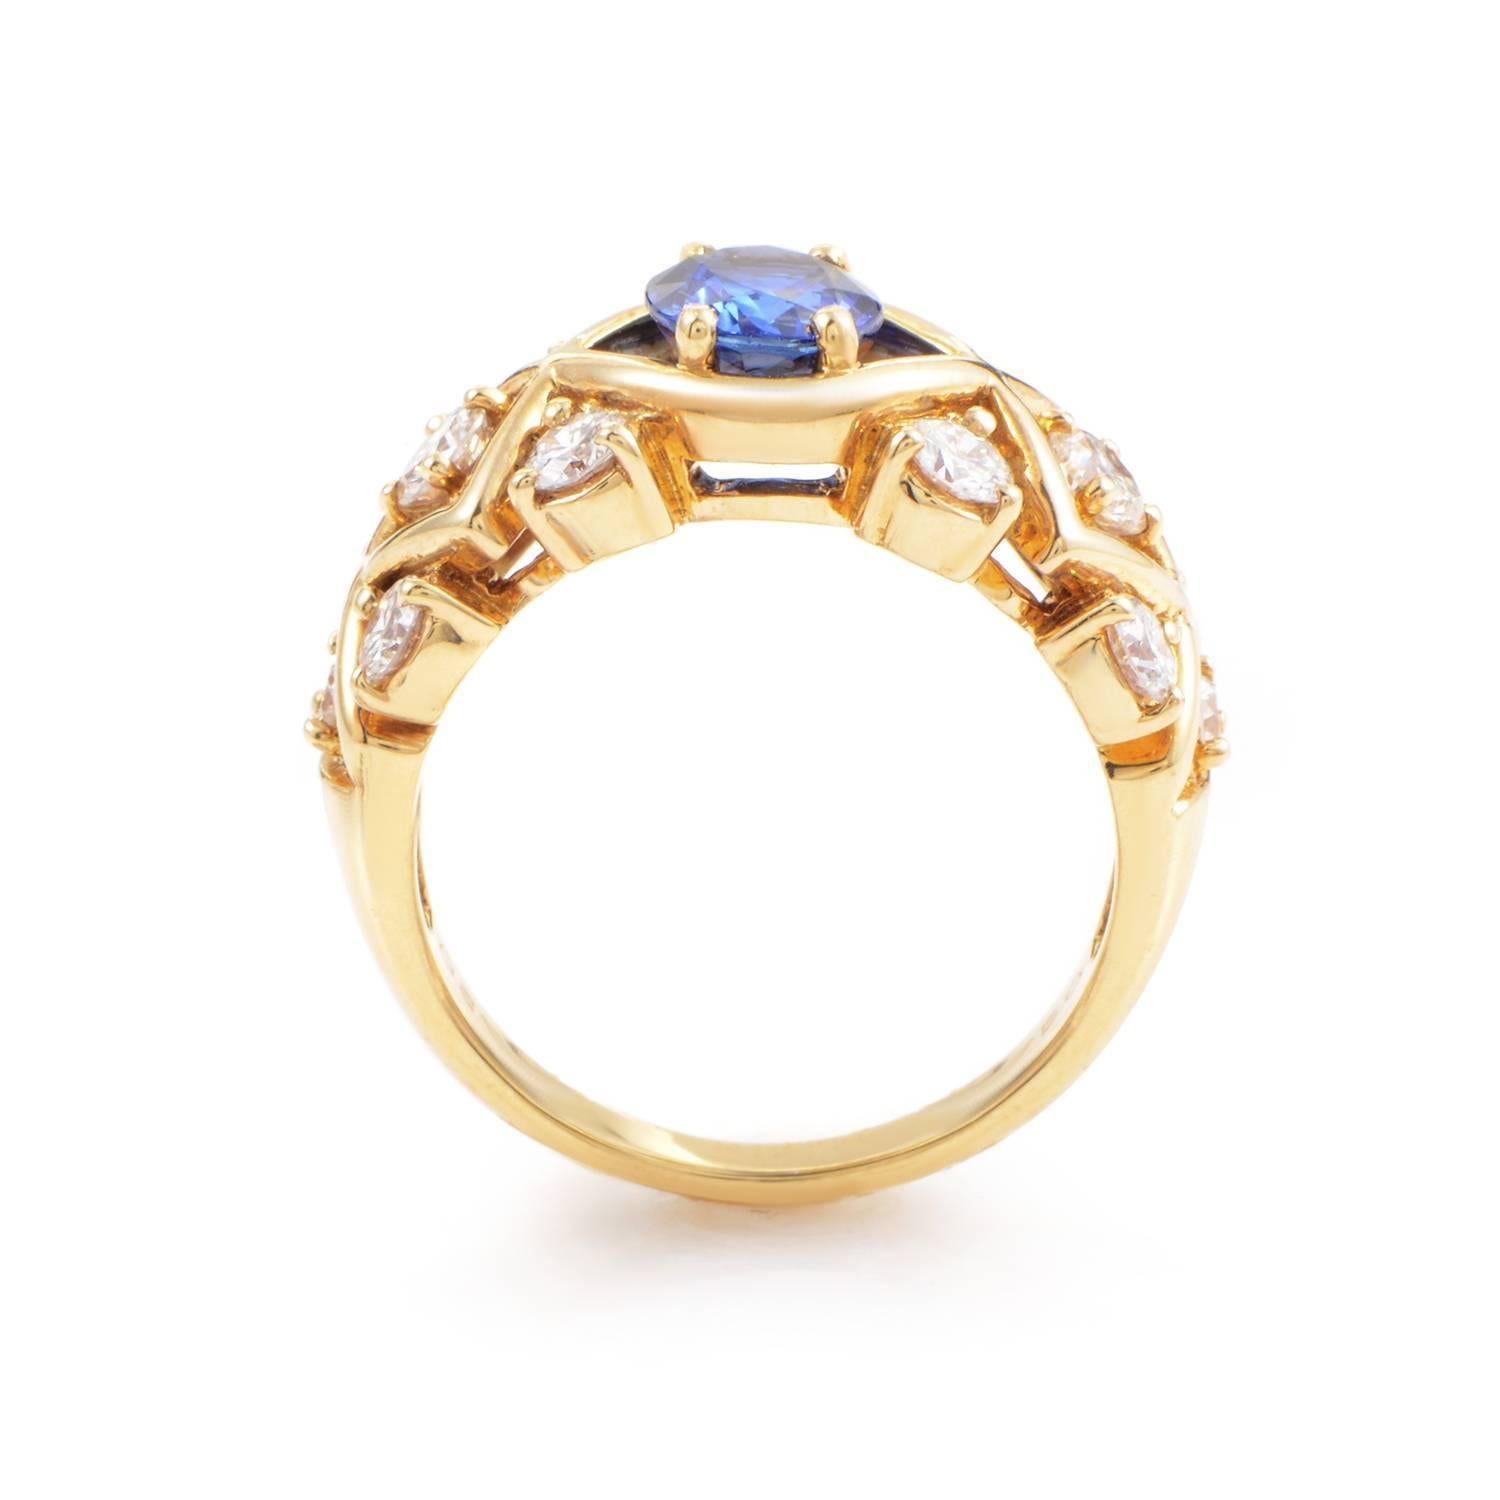 18K yellow gold rises from a mere pristine band into threaded complexity, stretching and weaving frames around every precious stone in its path. A pattern of 1.15ct of white diamonds precede the prominent peak of a 1.38ct blue sapphire, which the